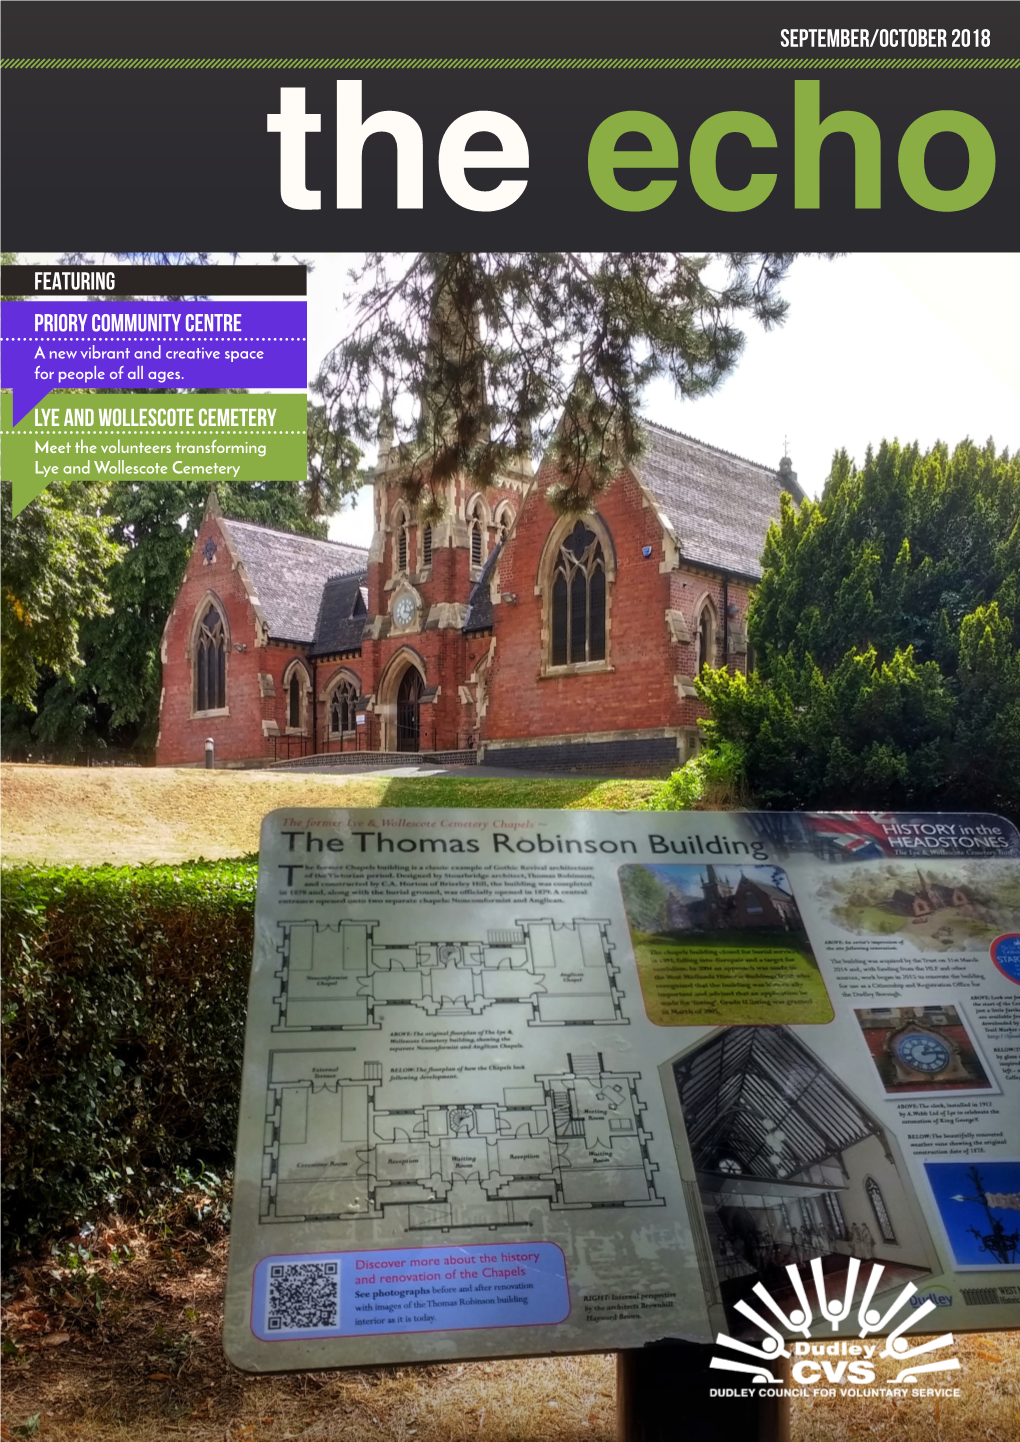 Lye and Wollescote Cemetery Priory Community Centre FEATURING SEPTEMBER/OCTOBER 2018